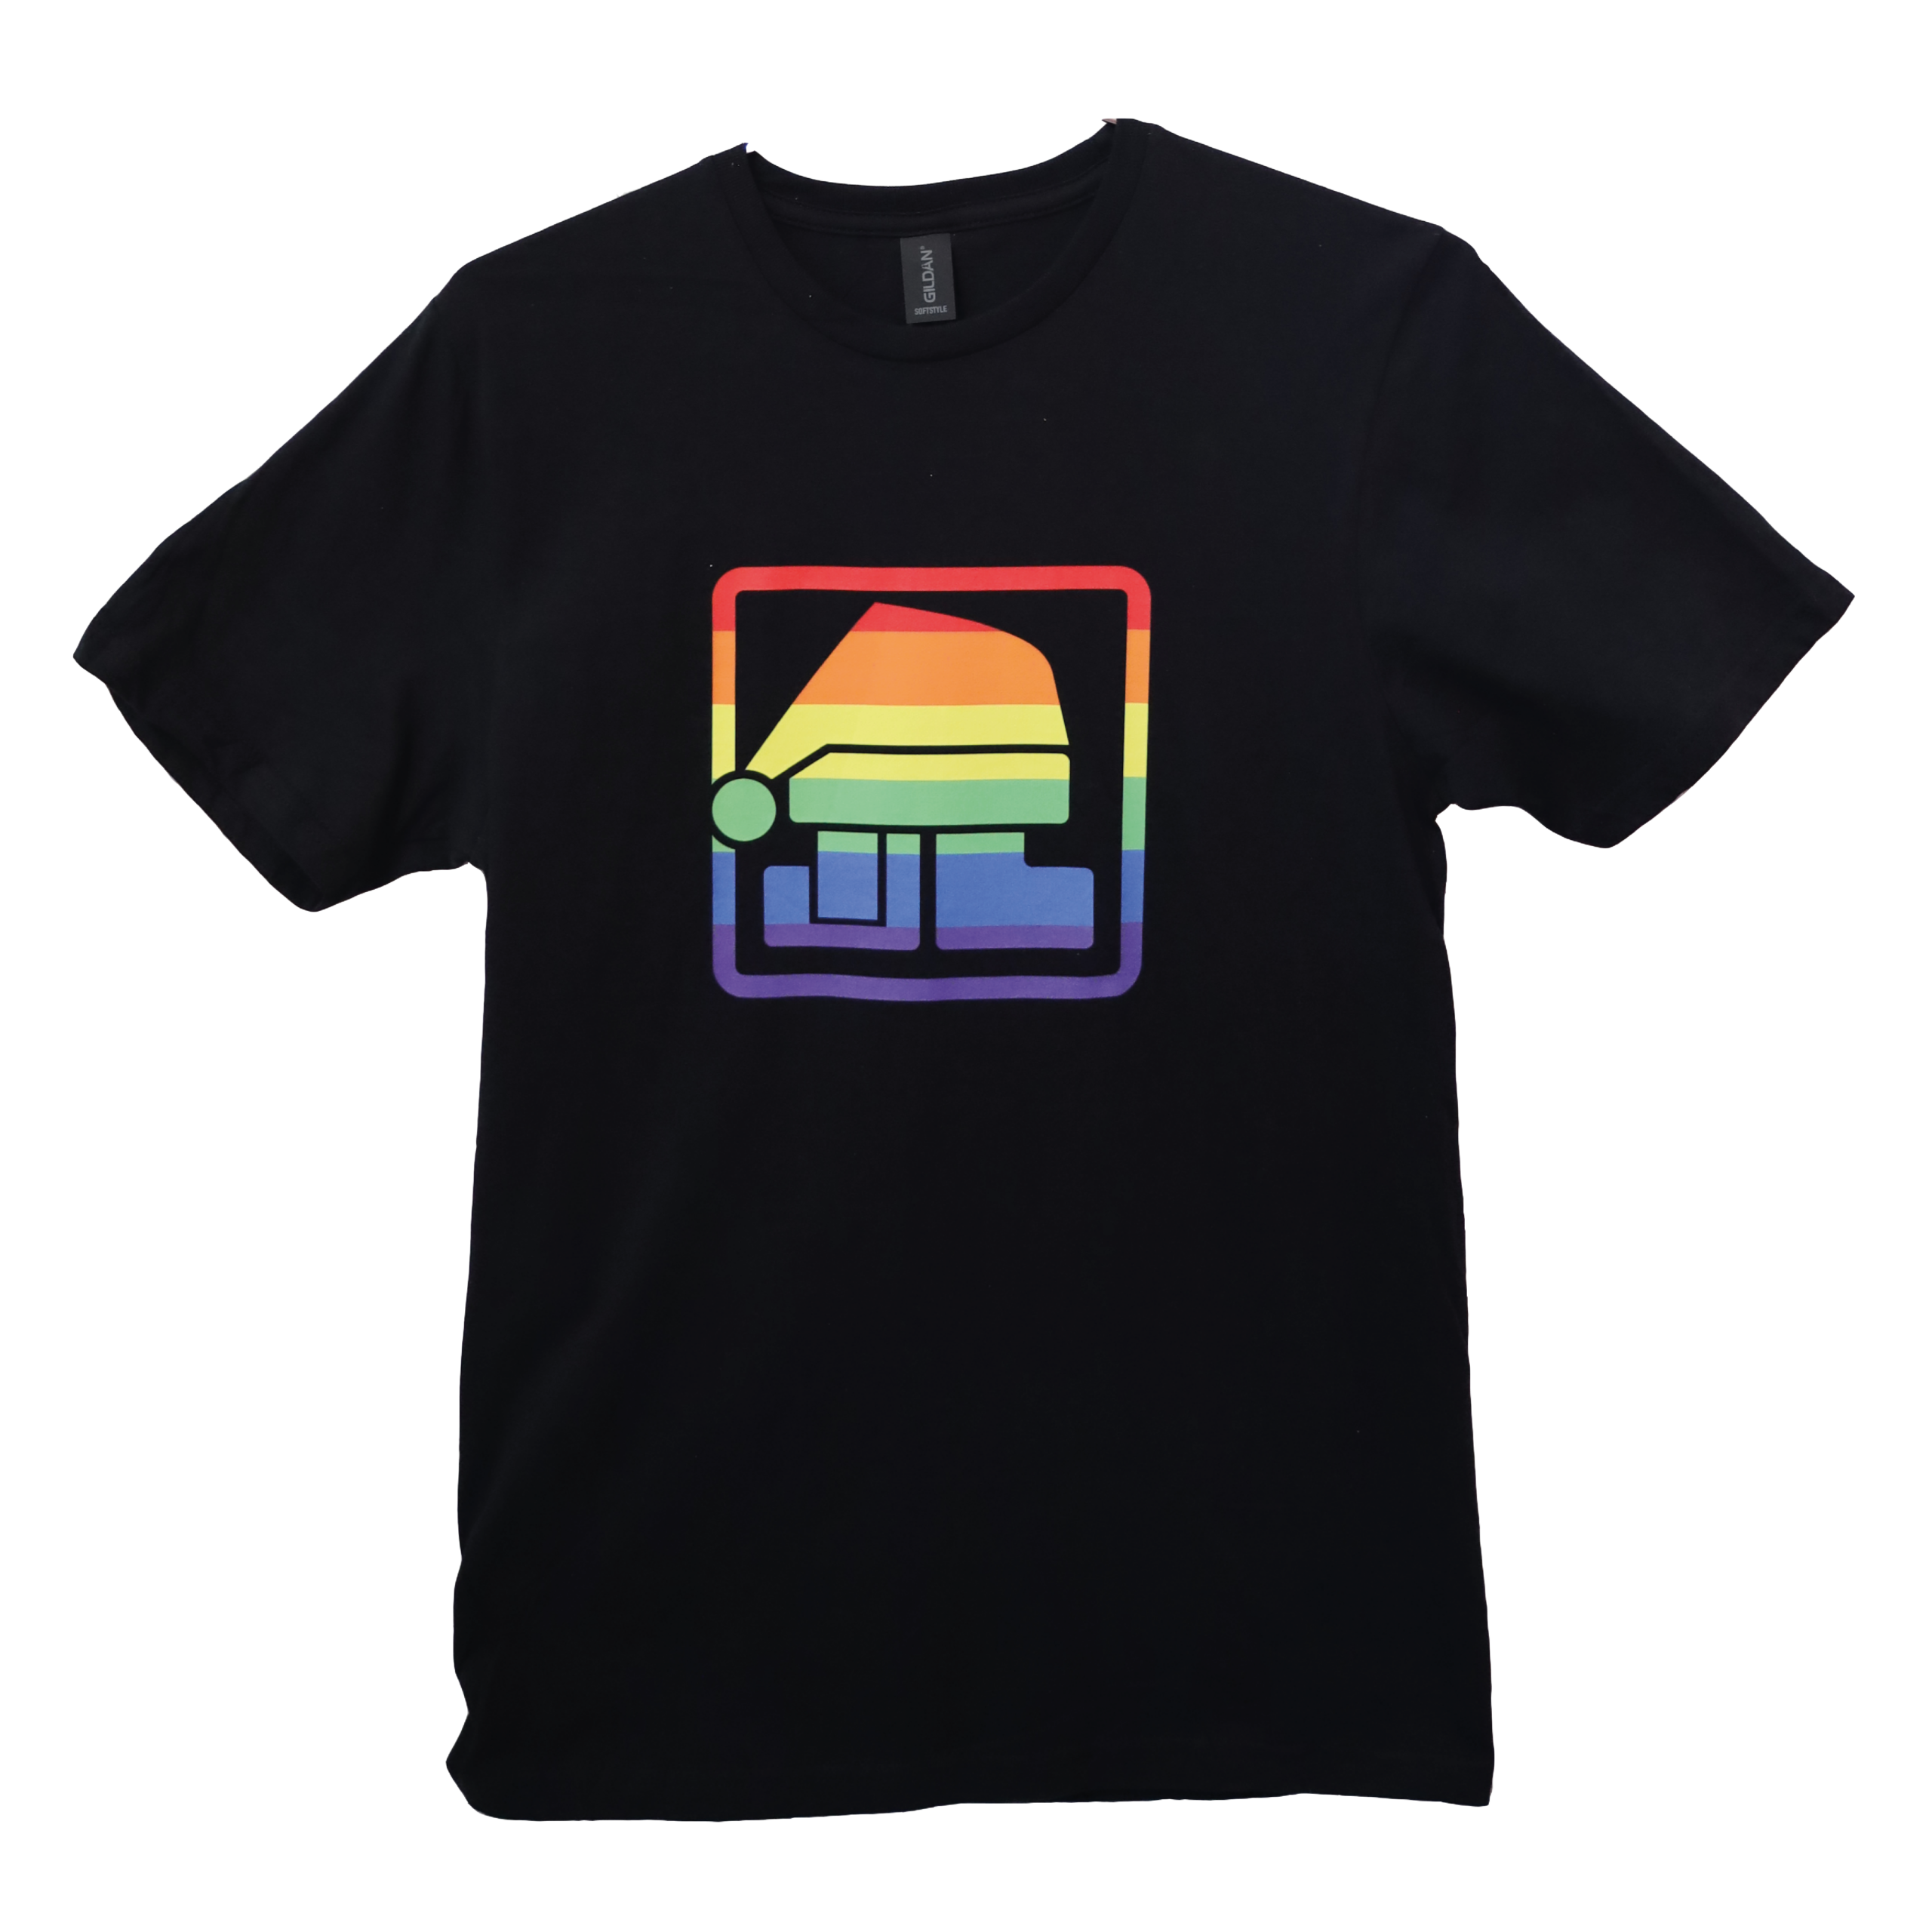 Featured image for “Pride T-shirt”